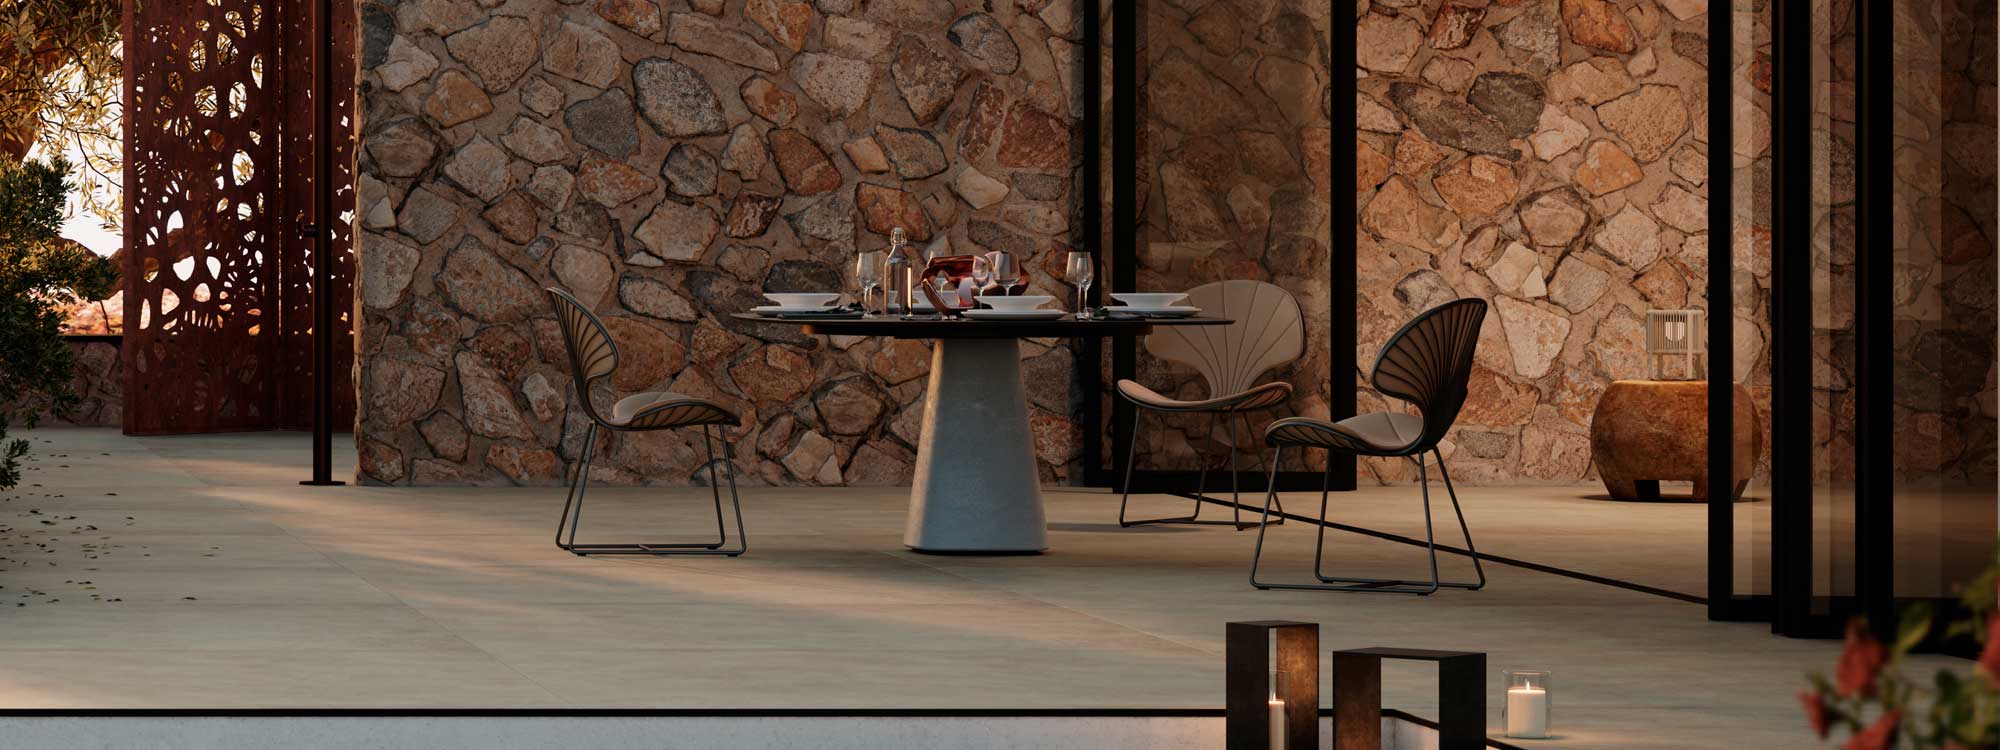 Image of Royal Botania Conix pedestal table with Ostrea modern garden chairs on tranquil courtyard